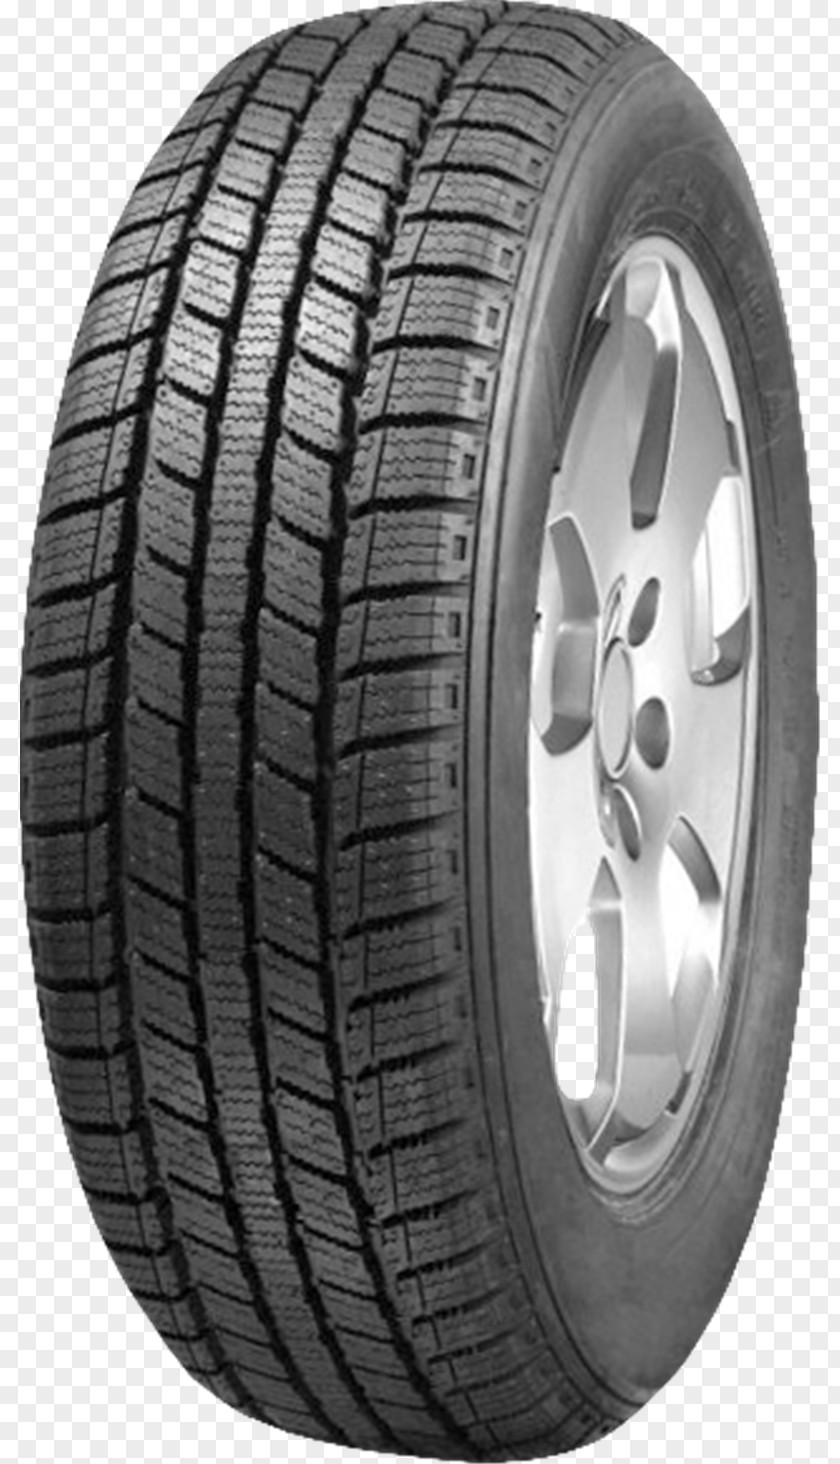 Car Goodyear Tire And Rubber Company Land Rover IOTA PNG